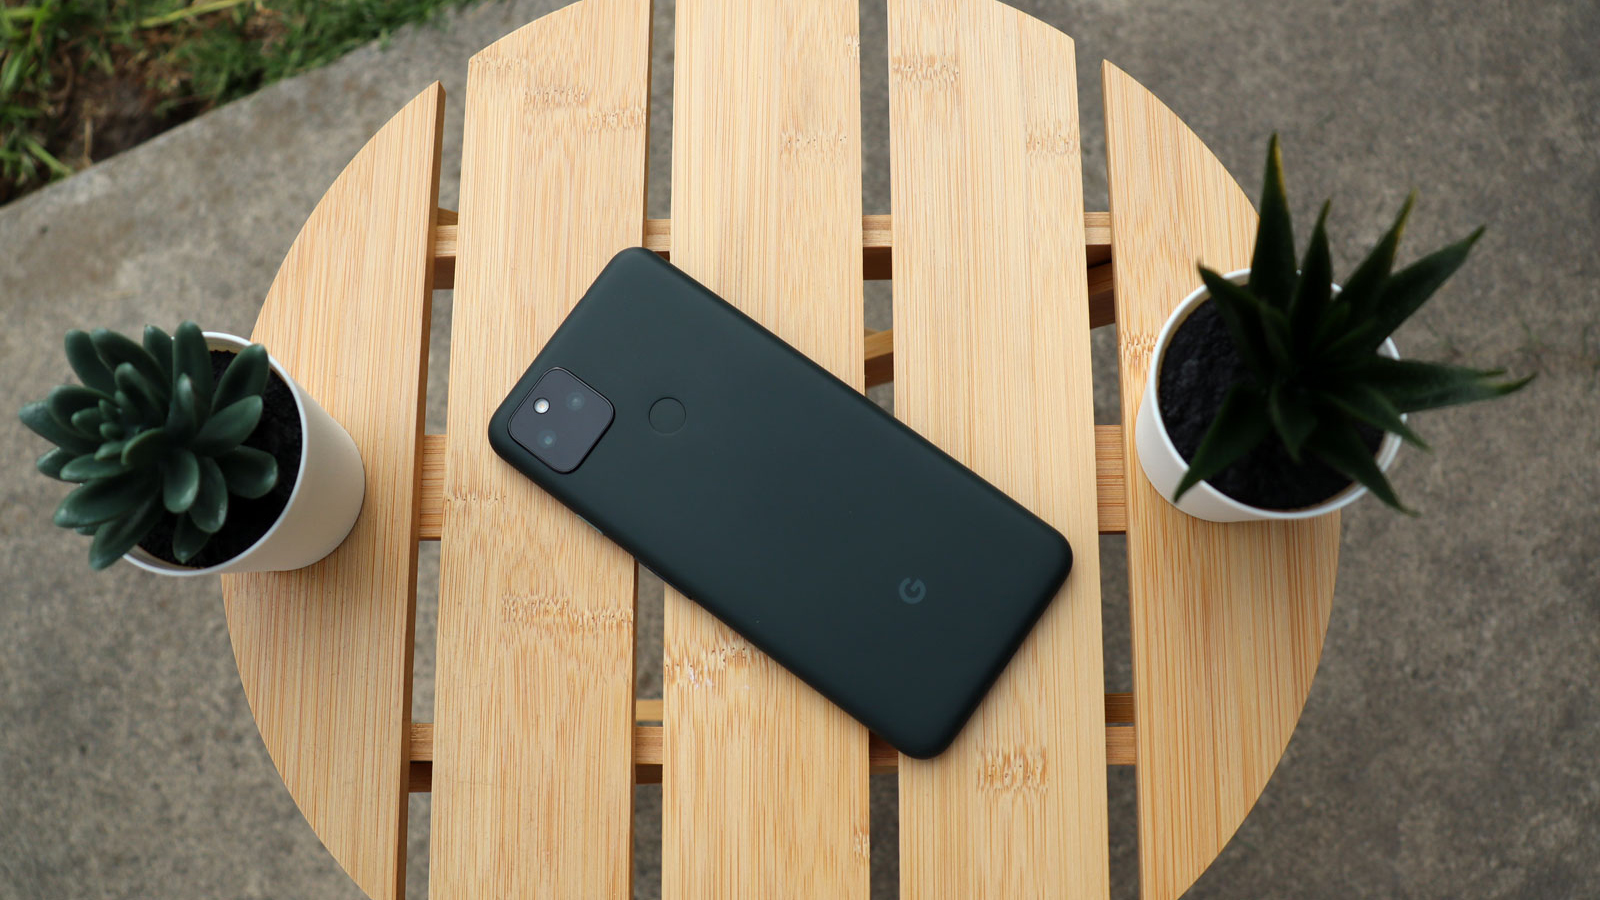 Here's another sign the Google Pixel 6a is launching very soon TechRadar